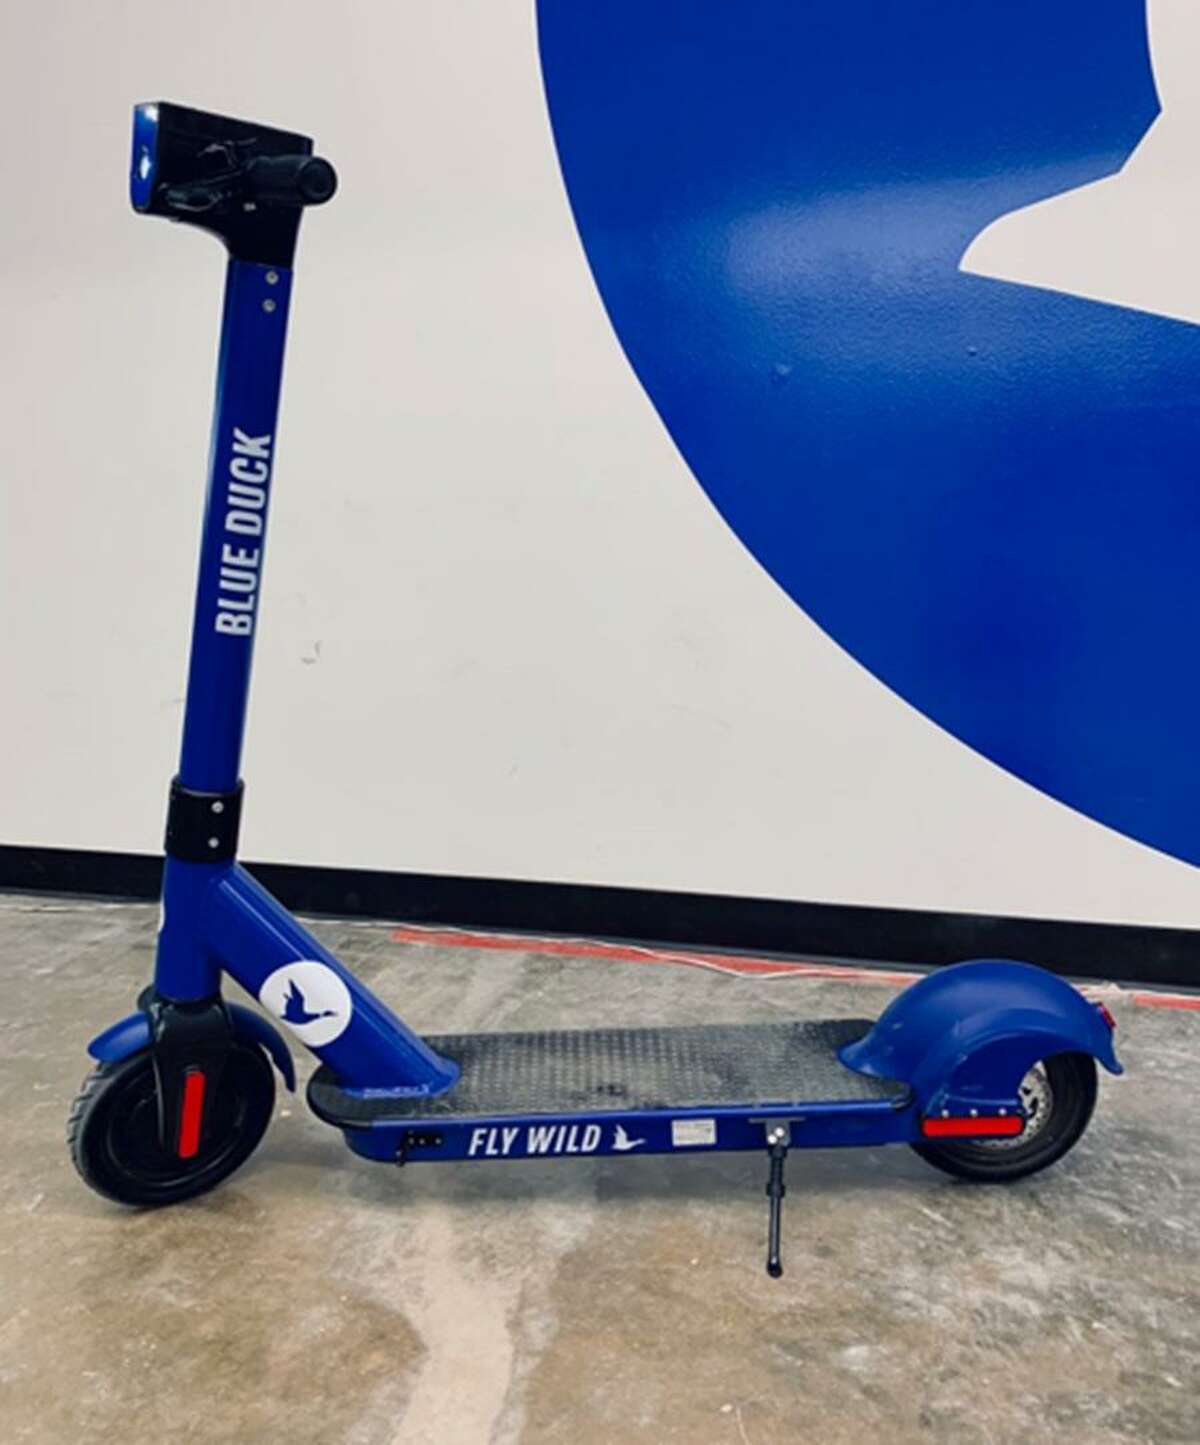 San Antonio-based Blue Duck this week introduced a “sturdier, safer” model that CEO Eric Bell hopes will distinguish the young start-up from its six other competitors here, including Lime, Lyft and Bird.